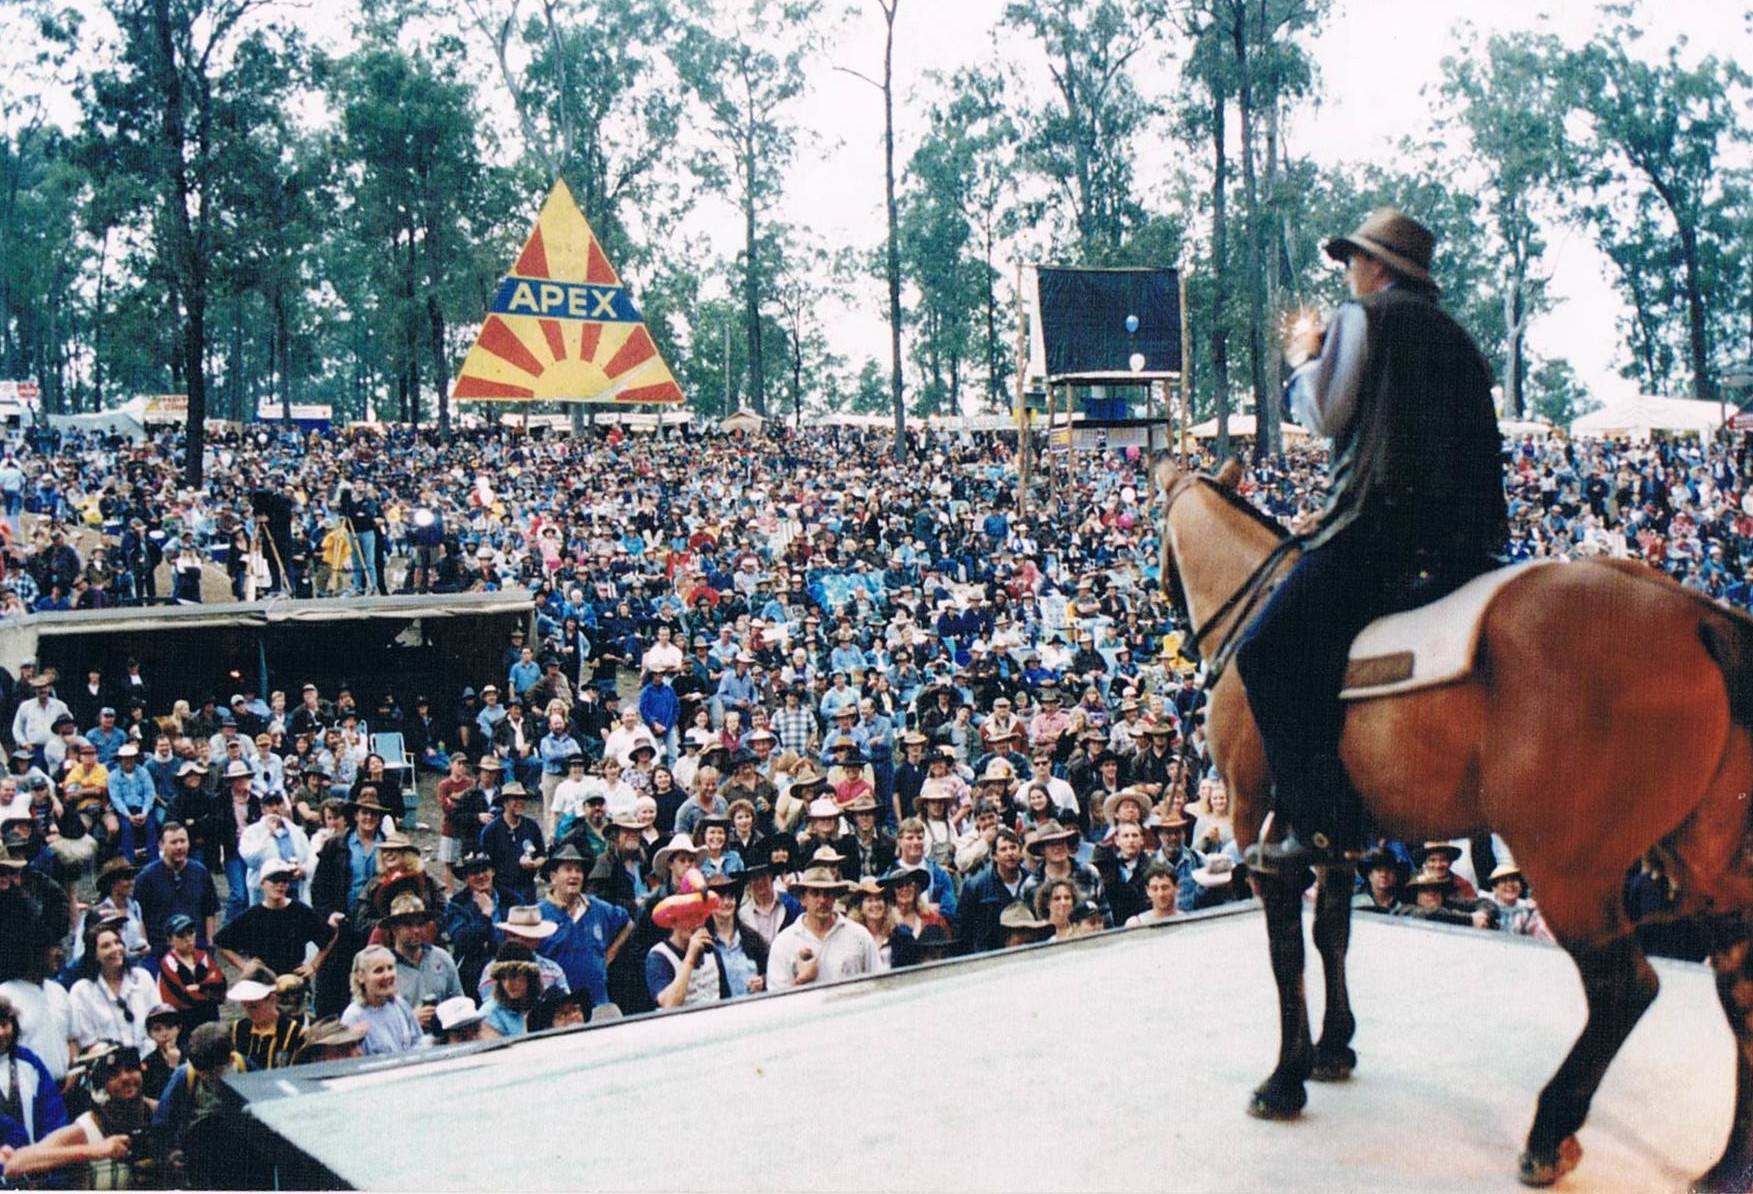 Guy McLean and his horse Nugget on stage entertaining the crowd | Image